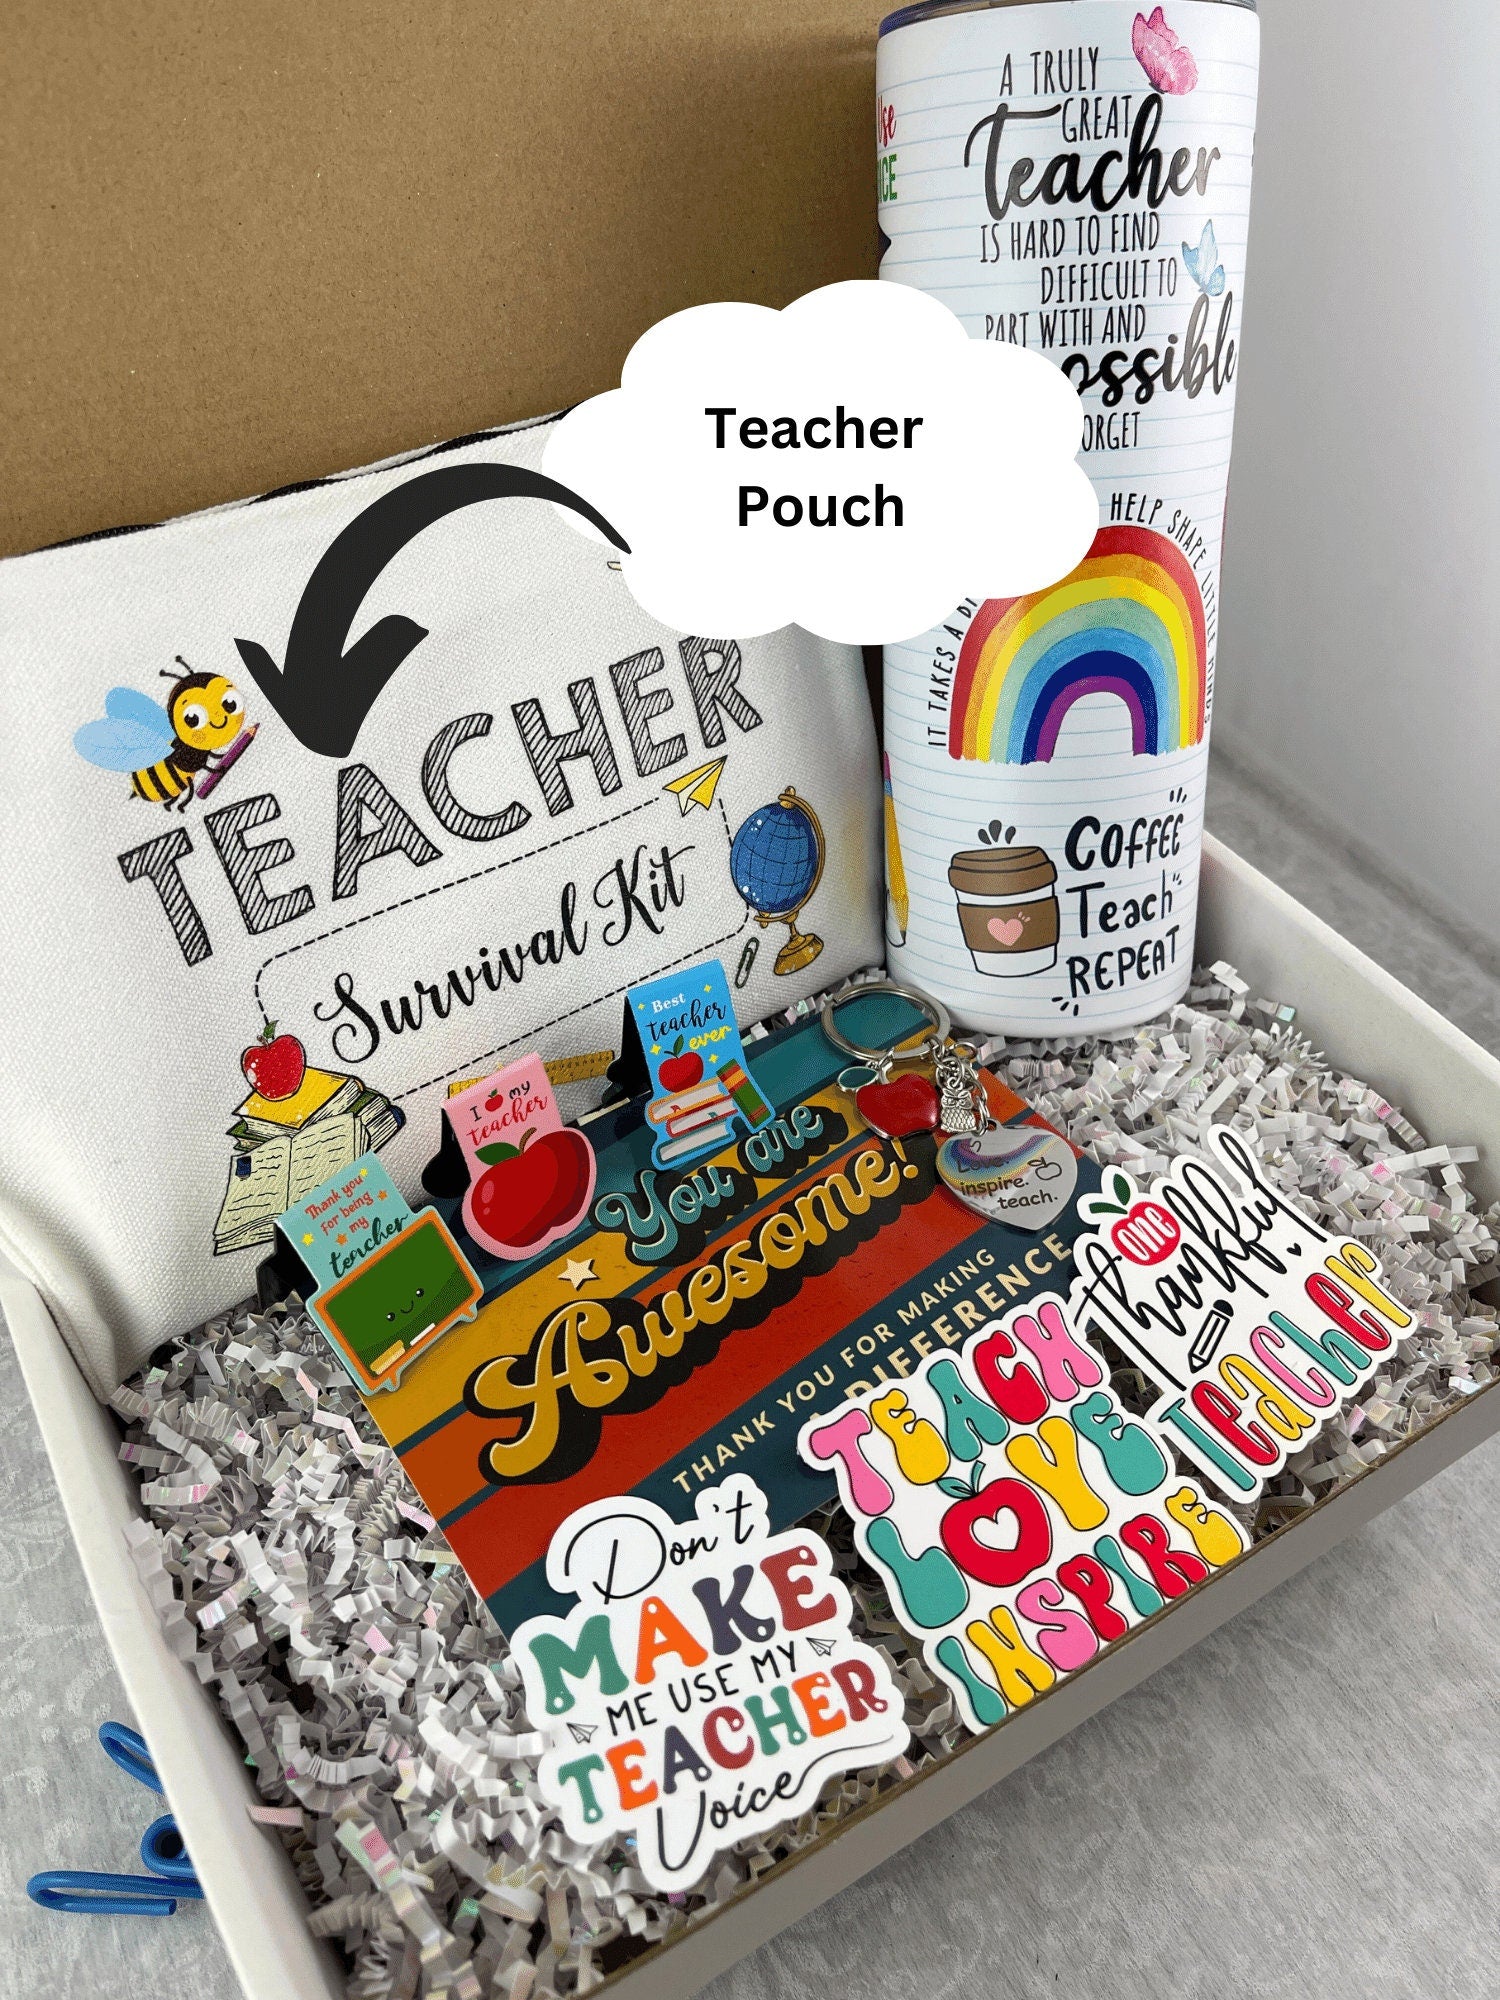 Back to School Teacher Gift Ideas - Making Memories With Your Kids